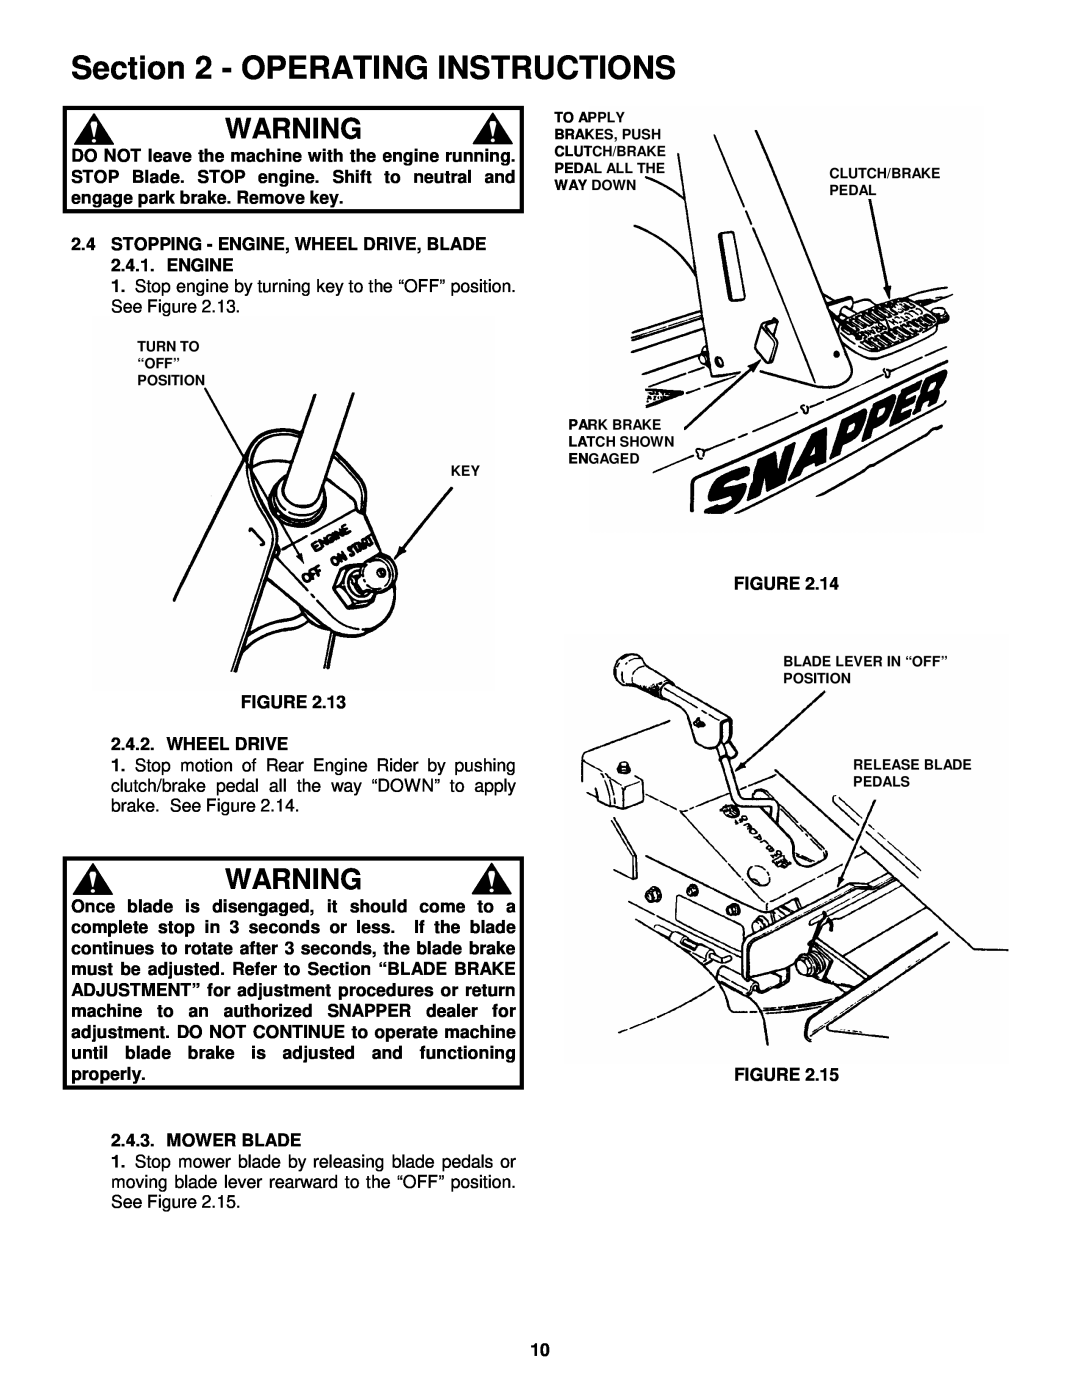 Snapper important safety instructions Operating Instructions, Stop engine by turning key to the “OFF” position. See Figure 